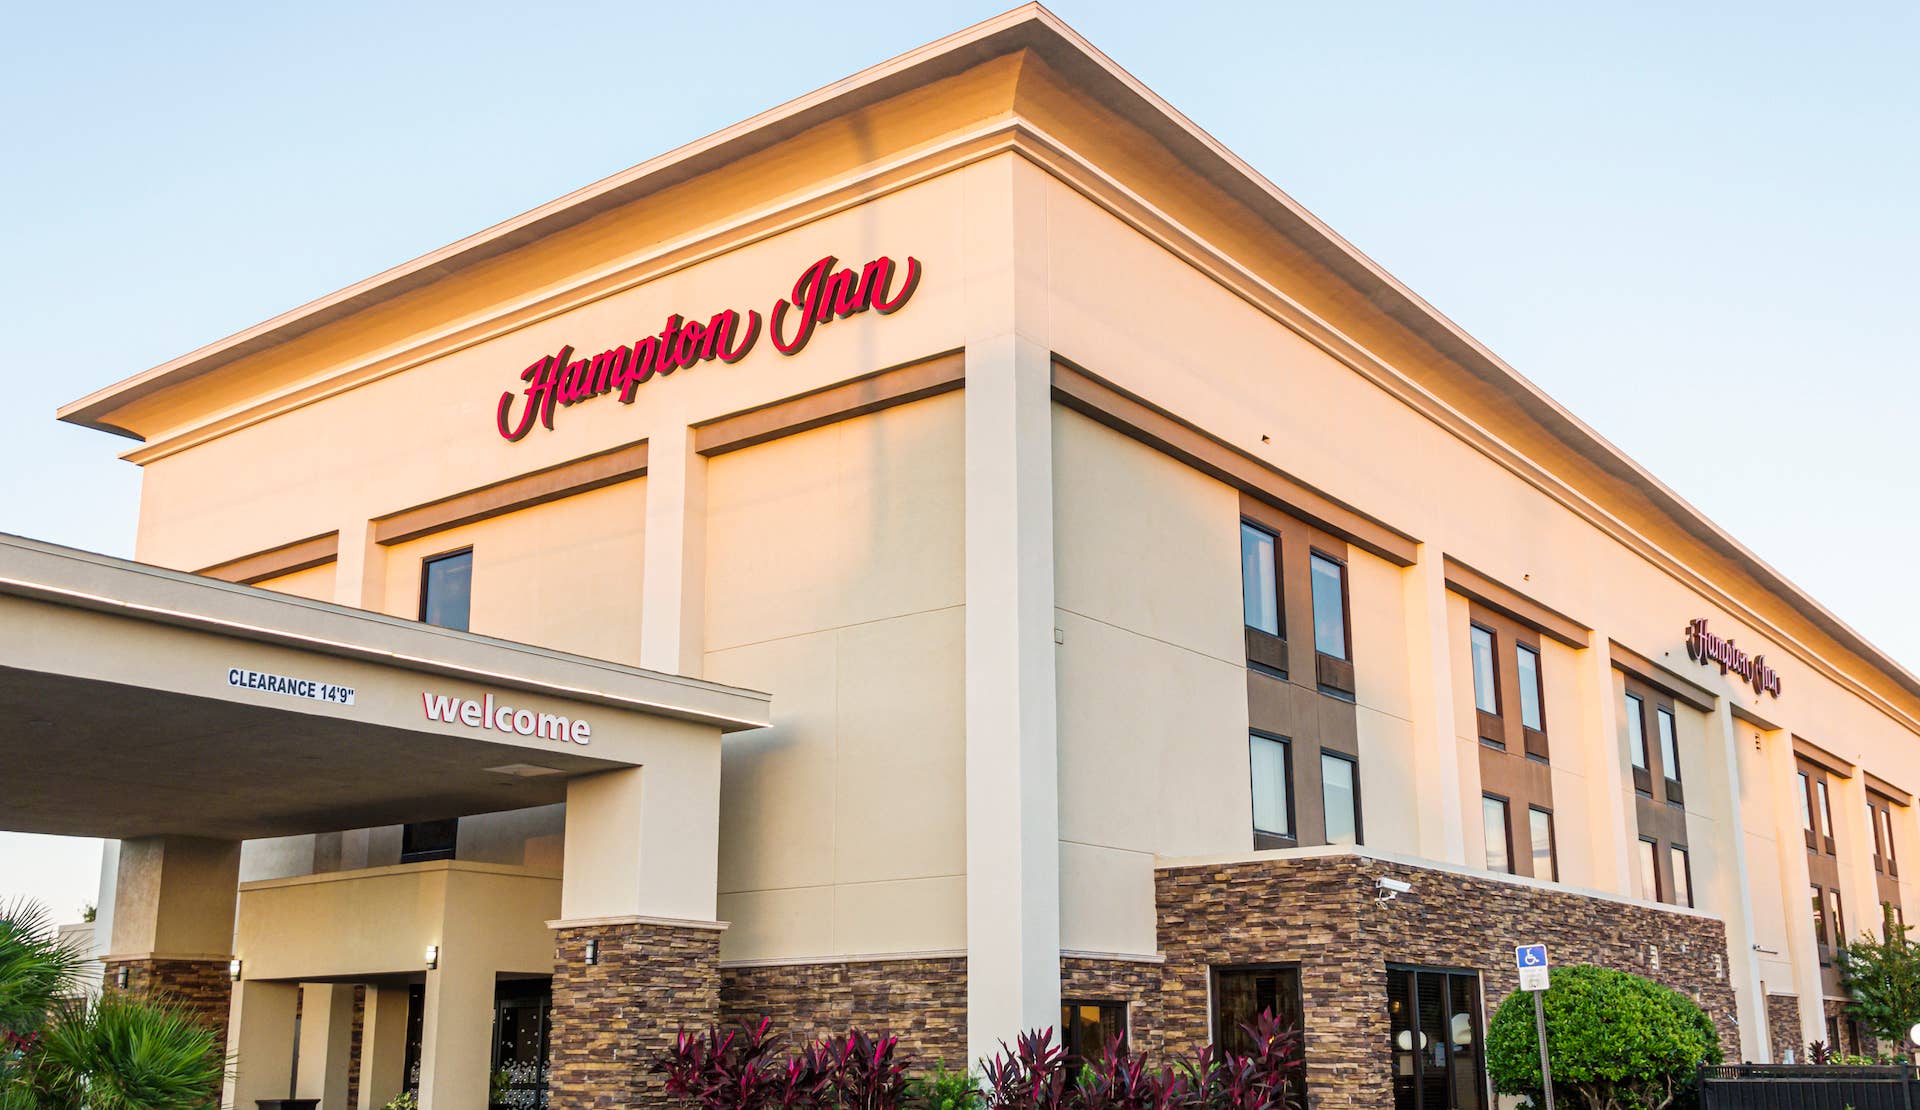 13 people hospitalized due to carbon monoxide poisoning at Ohio Hampton Inn